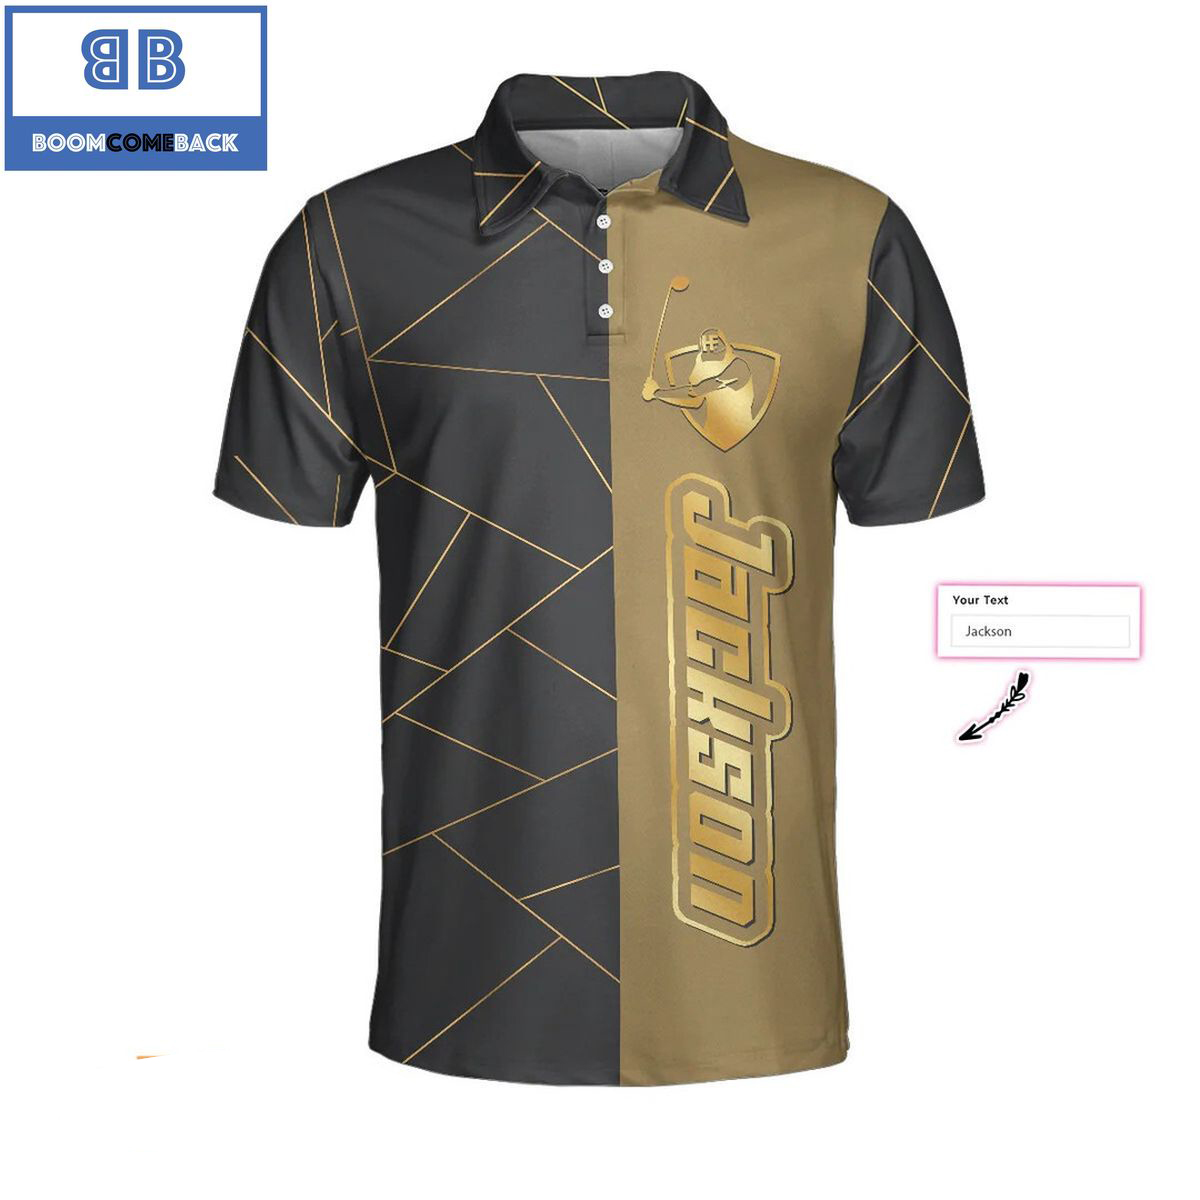 Personalized2BGolden2BLines2BGolf2BAthletic2BCollared2BMens2BPolo2BShirt2B3 f3OU1